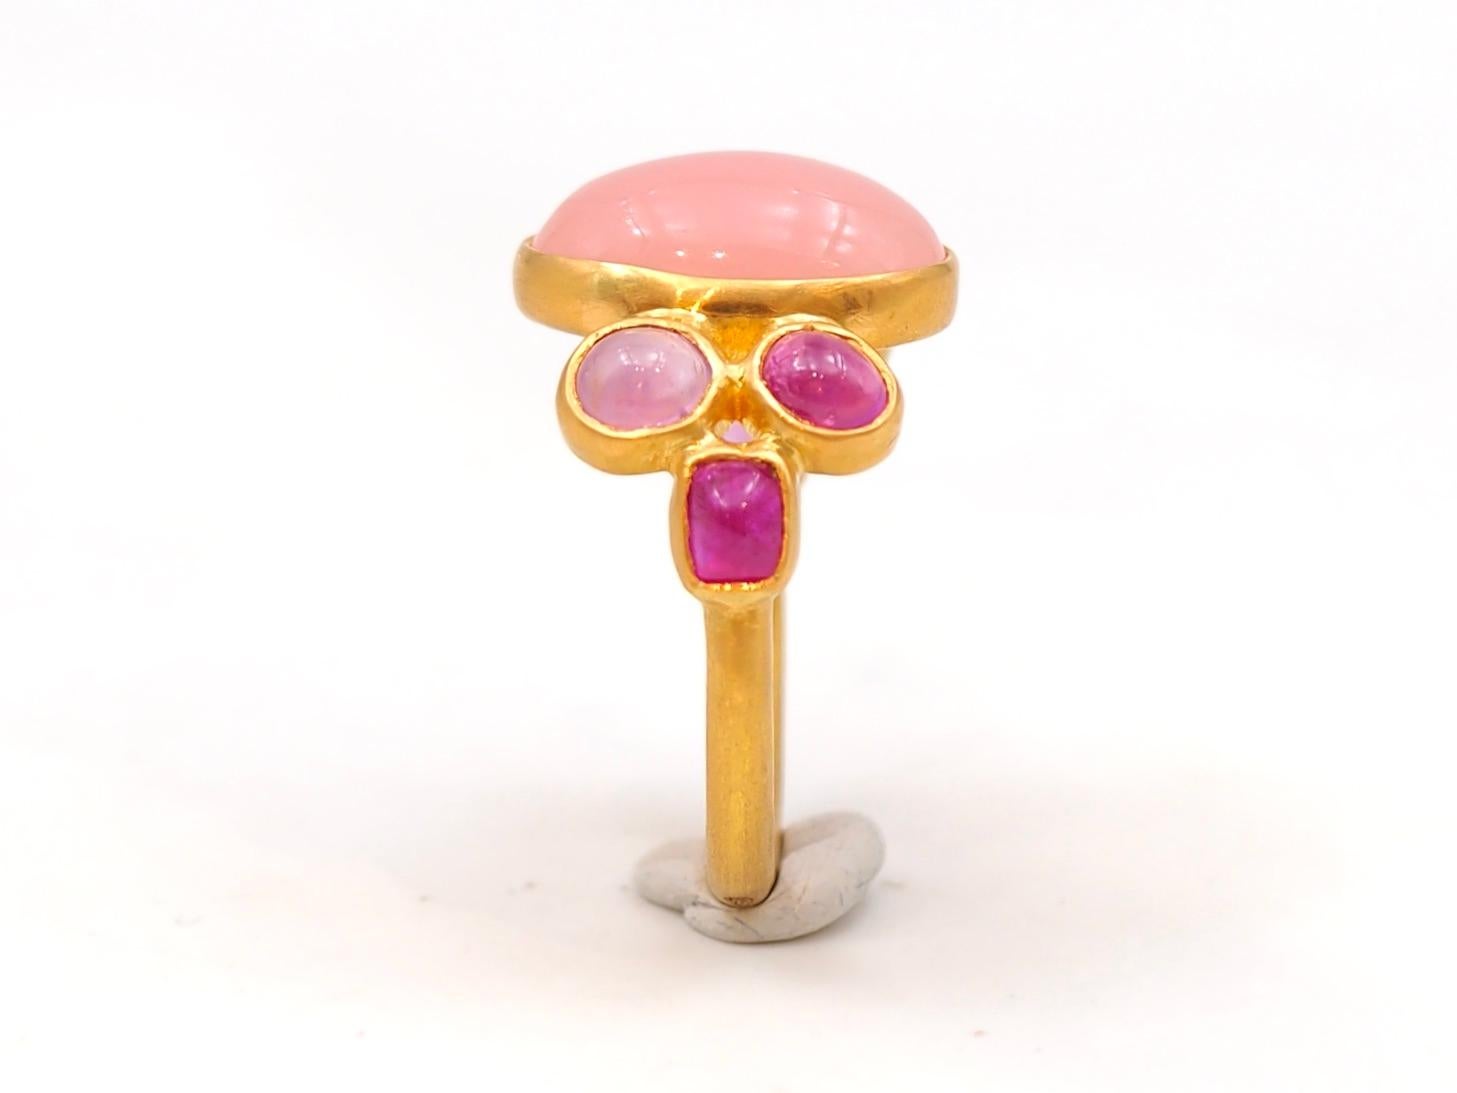 Scrives 5.25 Ct Peach Chalcedony 3.06 Ct Pink sapphire Cabochon 22 Kt Gold Ring For Sale 7